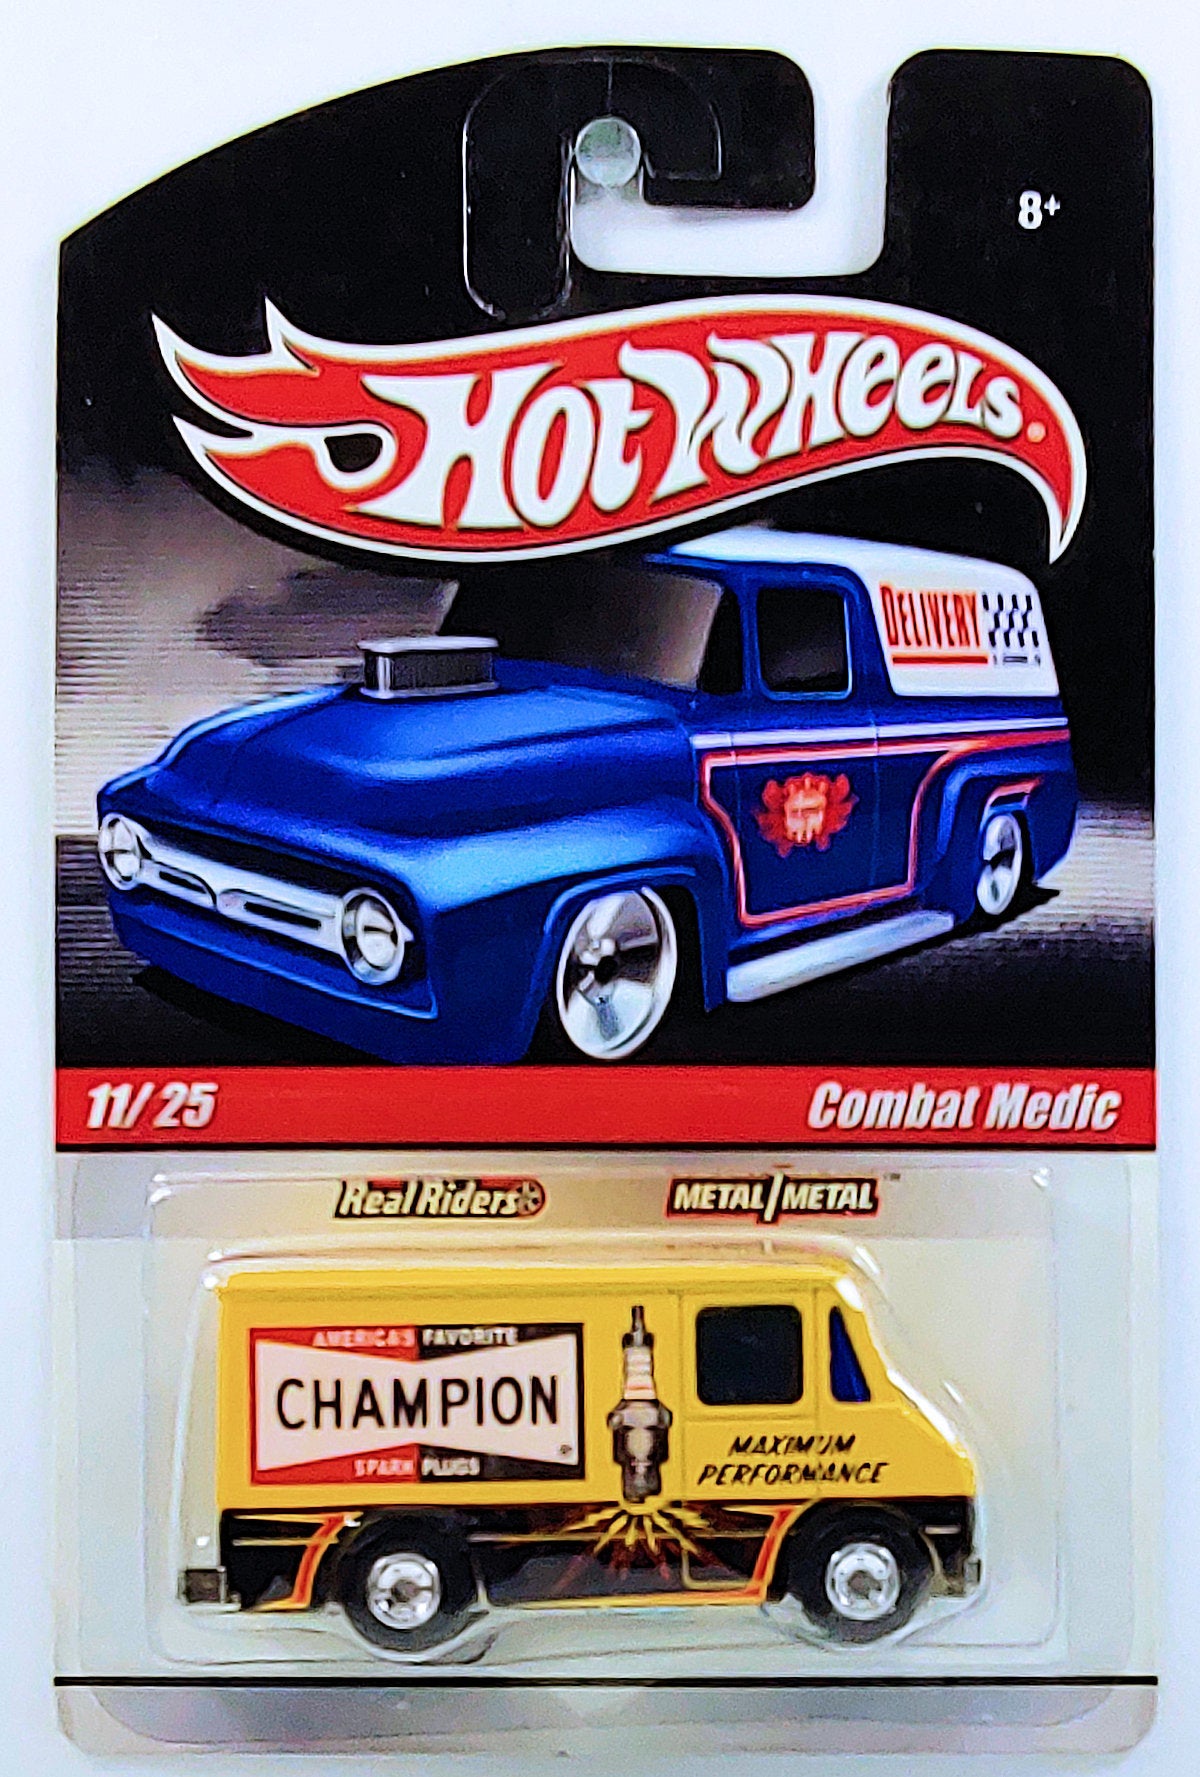 Hot Wheels 2010 - Delivery / Slick Rides 11/25 - Combat Medic - Yellow / Champion Spark Plugs - Metal/Metal & Real Riders